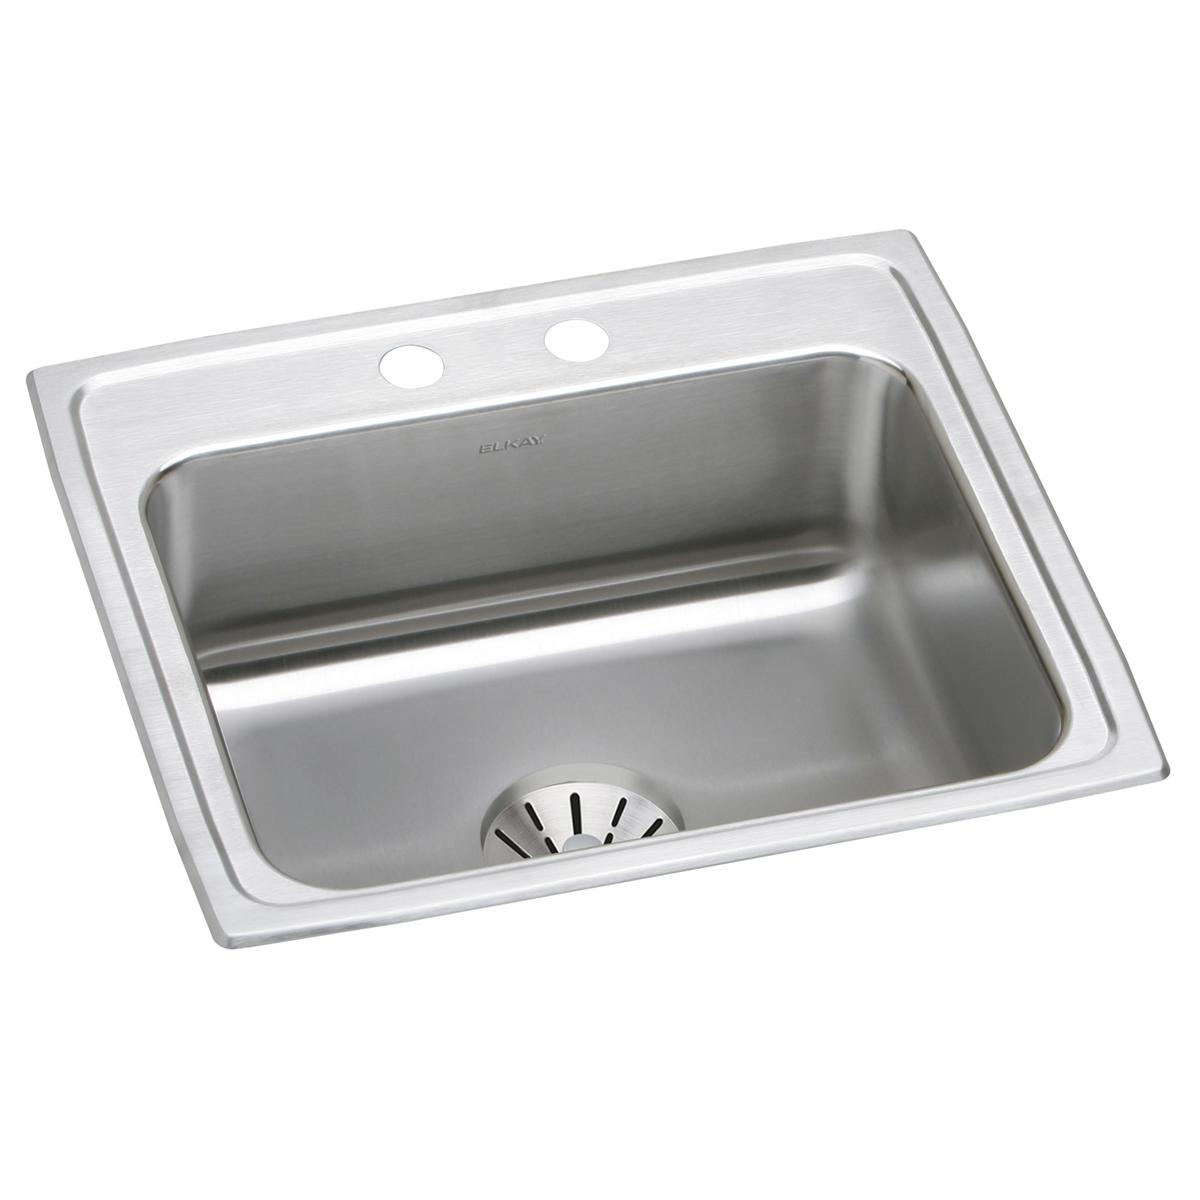 Elkay Lustertone Classic 22" x 19-1/2" x 10-1/8" Single Bowl Drop-in Sink with Perfect Drain